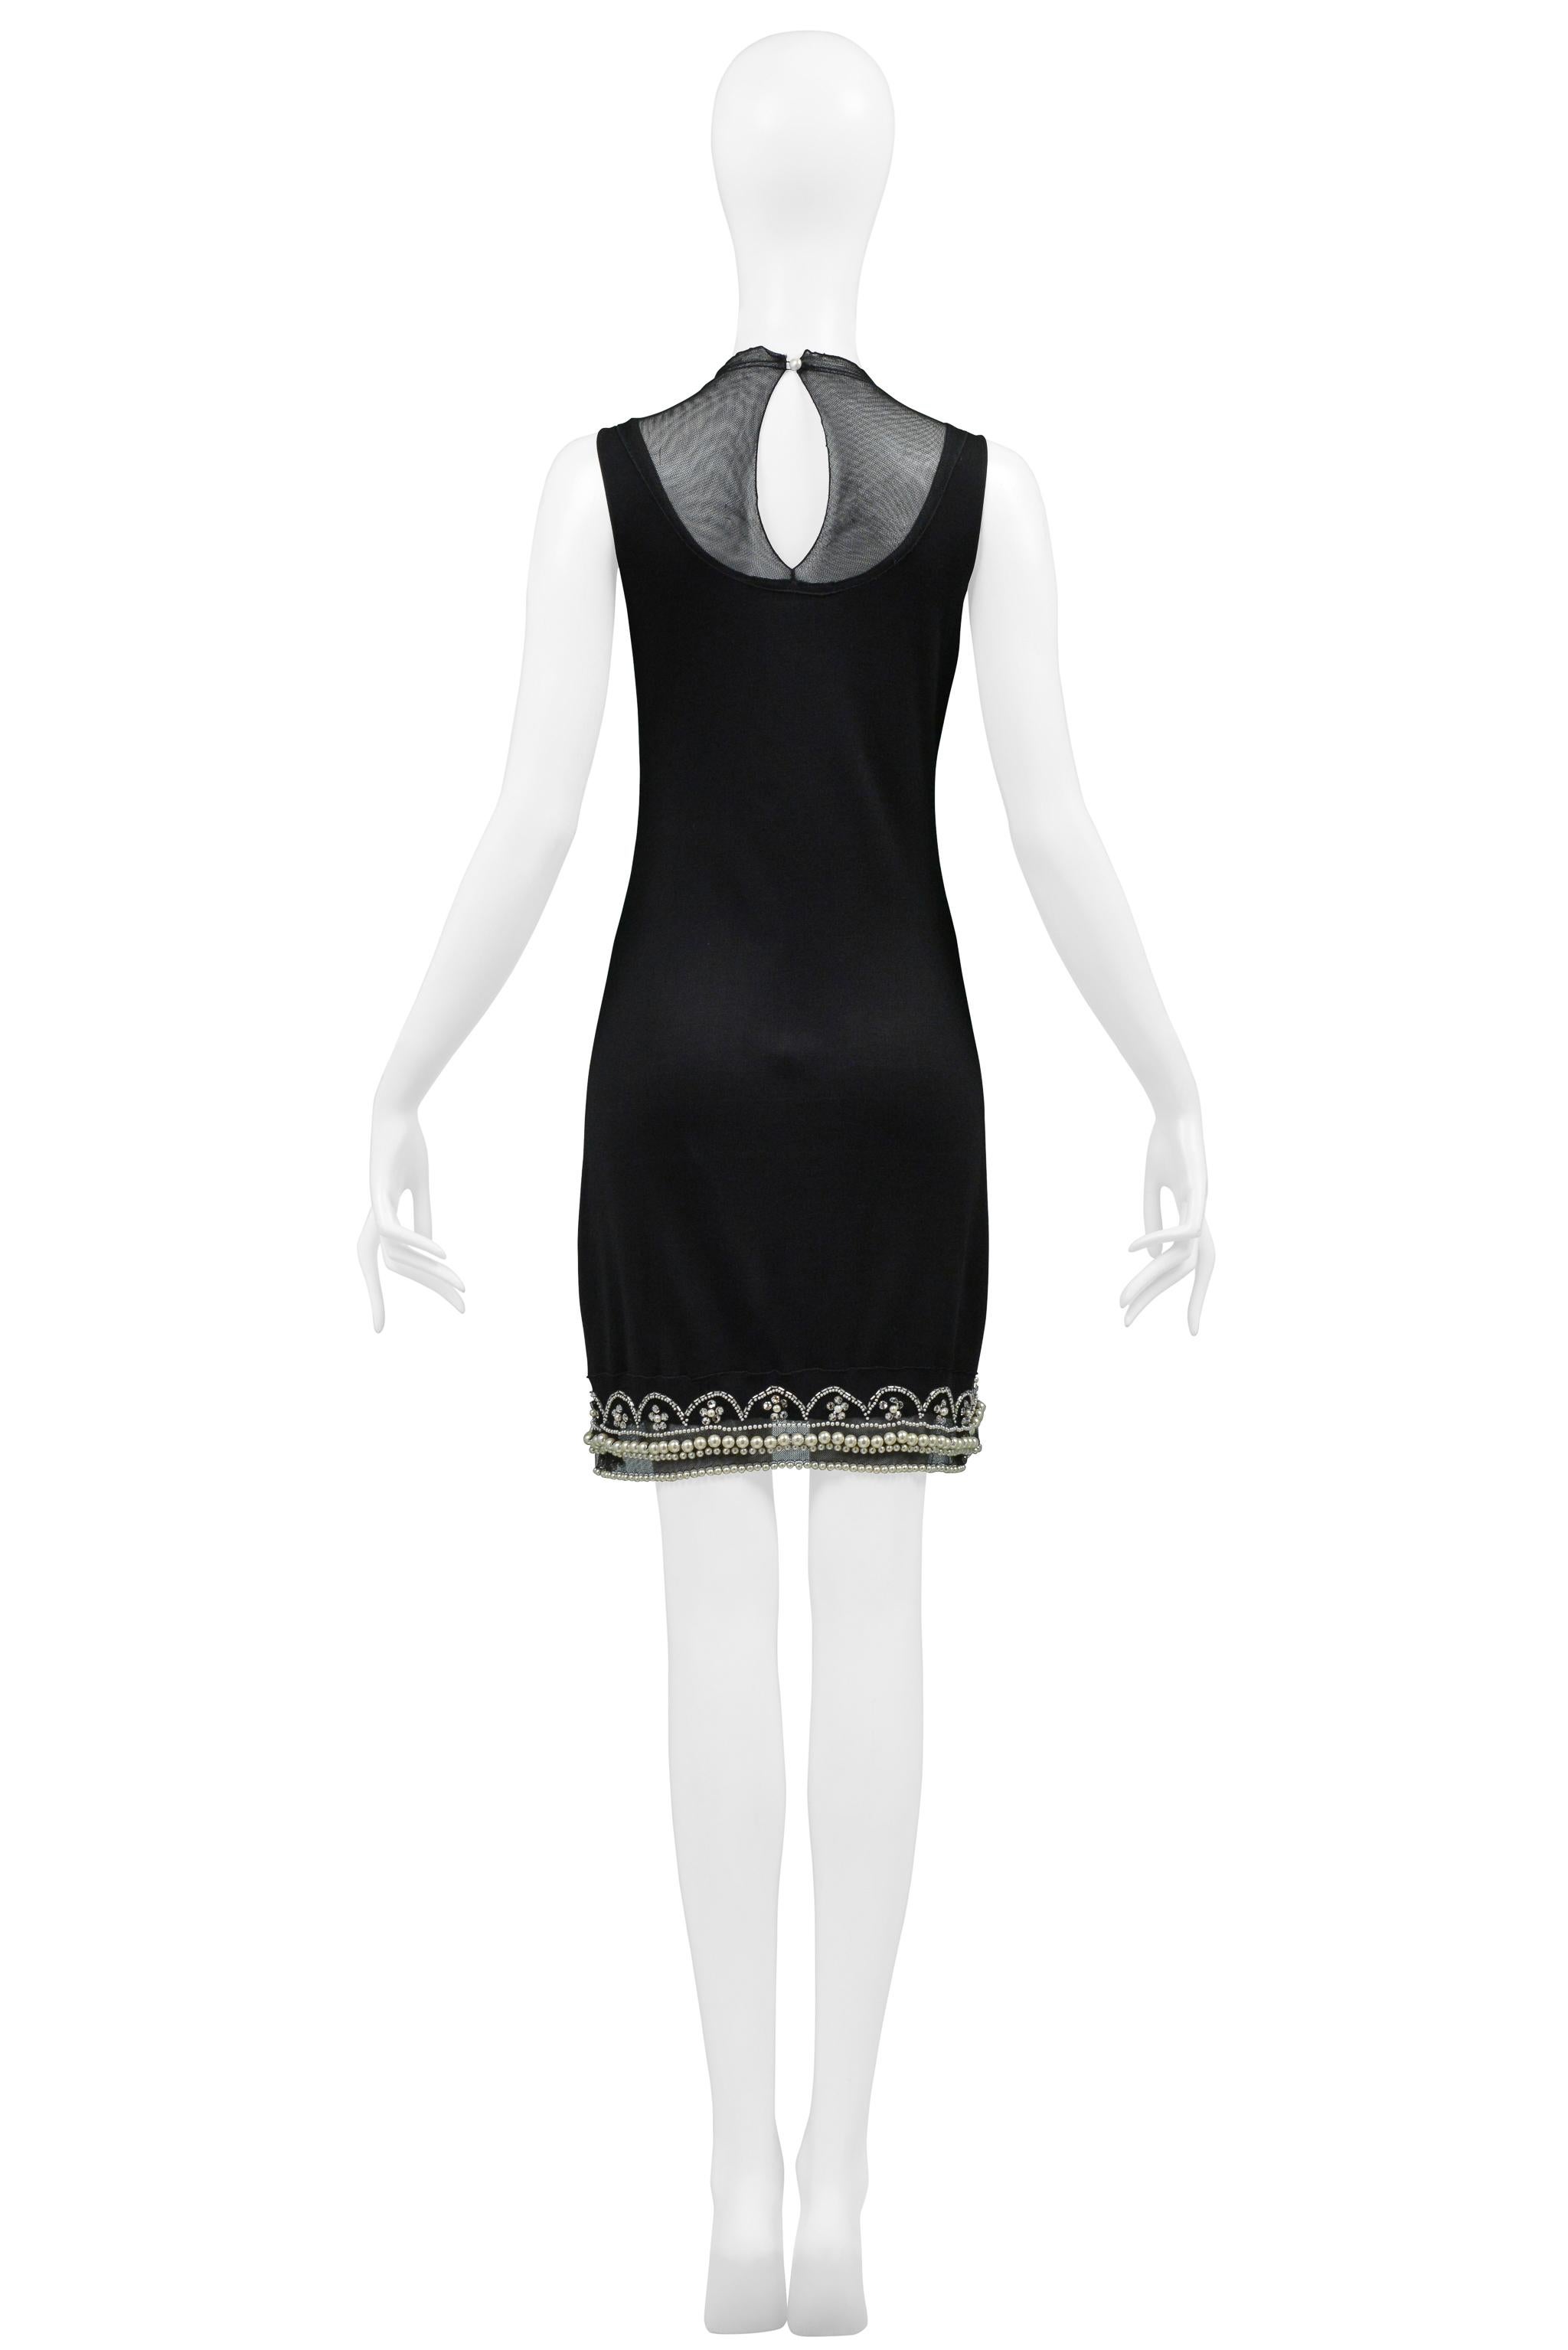 Christian Dior By John Galliano Black Silk Dress With Pearls & Crystals For Sale 2